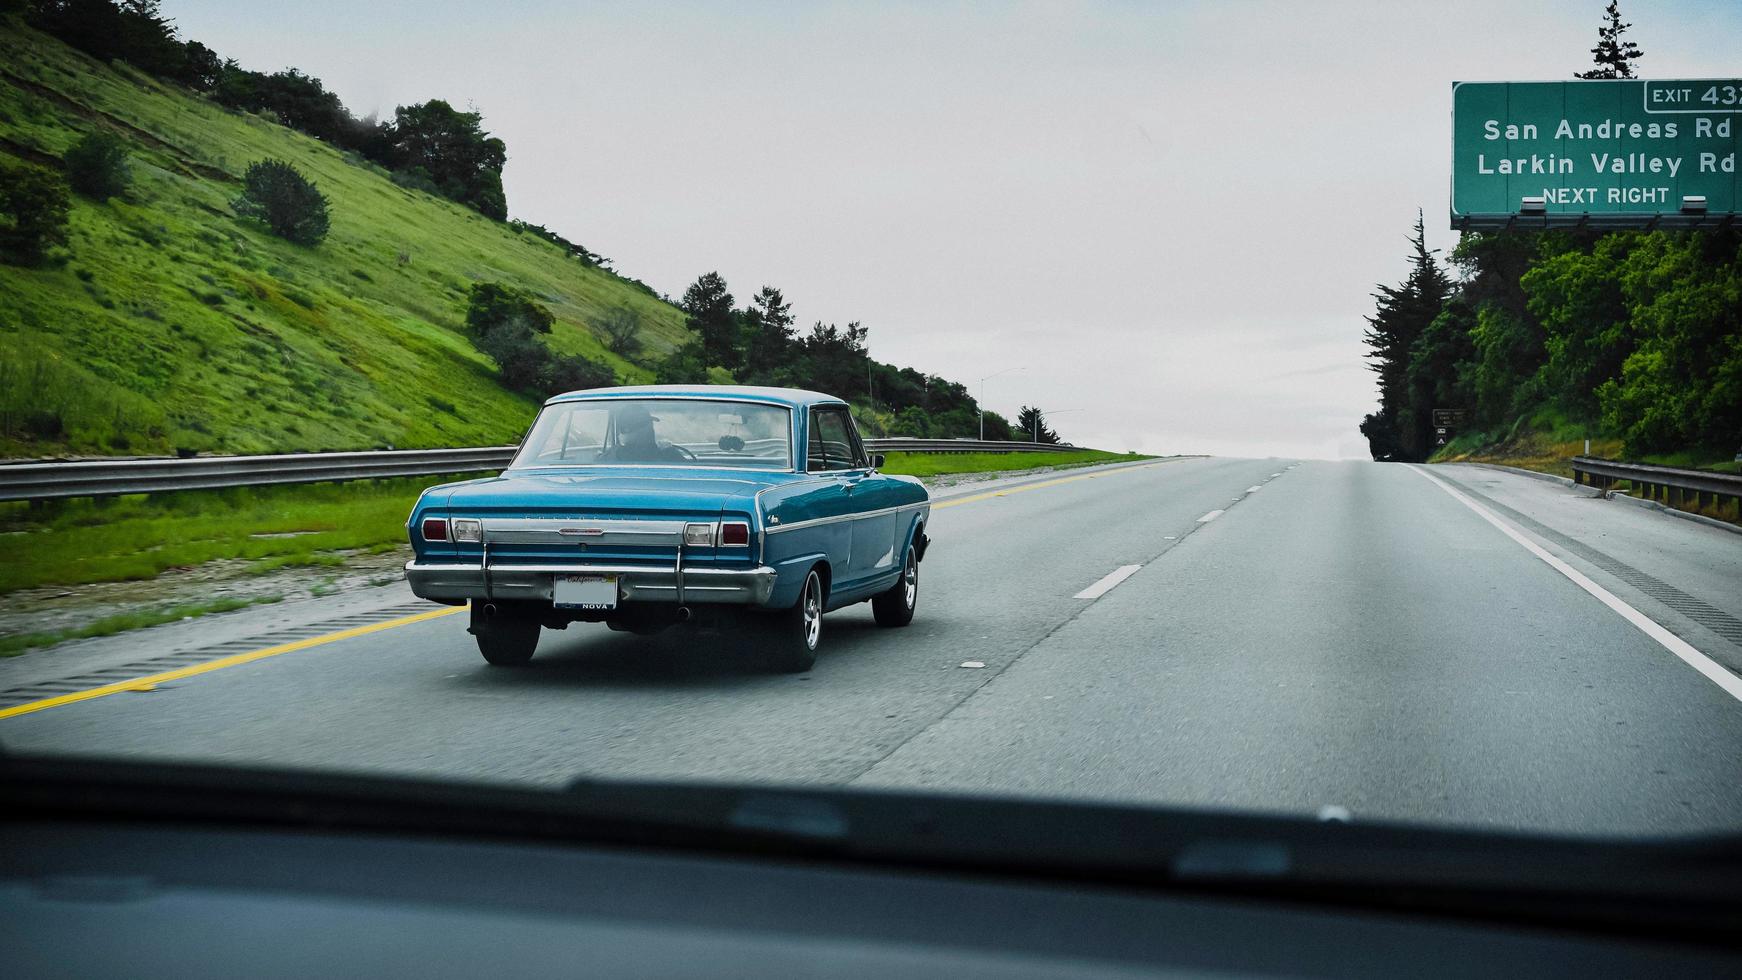 Vintage blue car driving on the California freeway photo